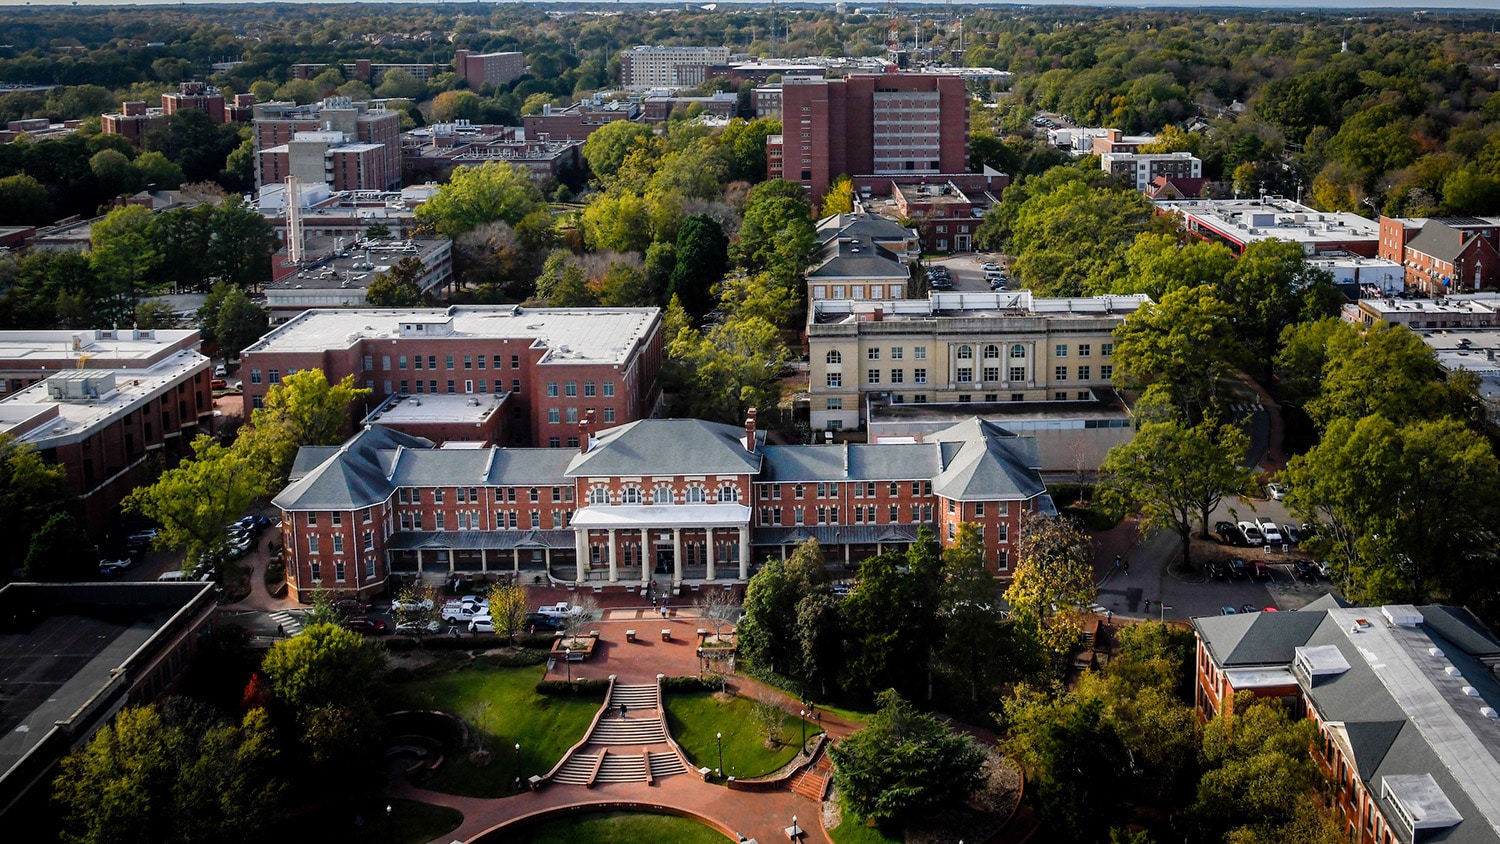 An aerial view of the 1911 Building and surrounding campus.